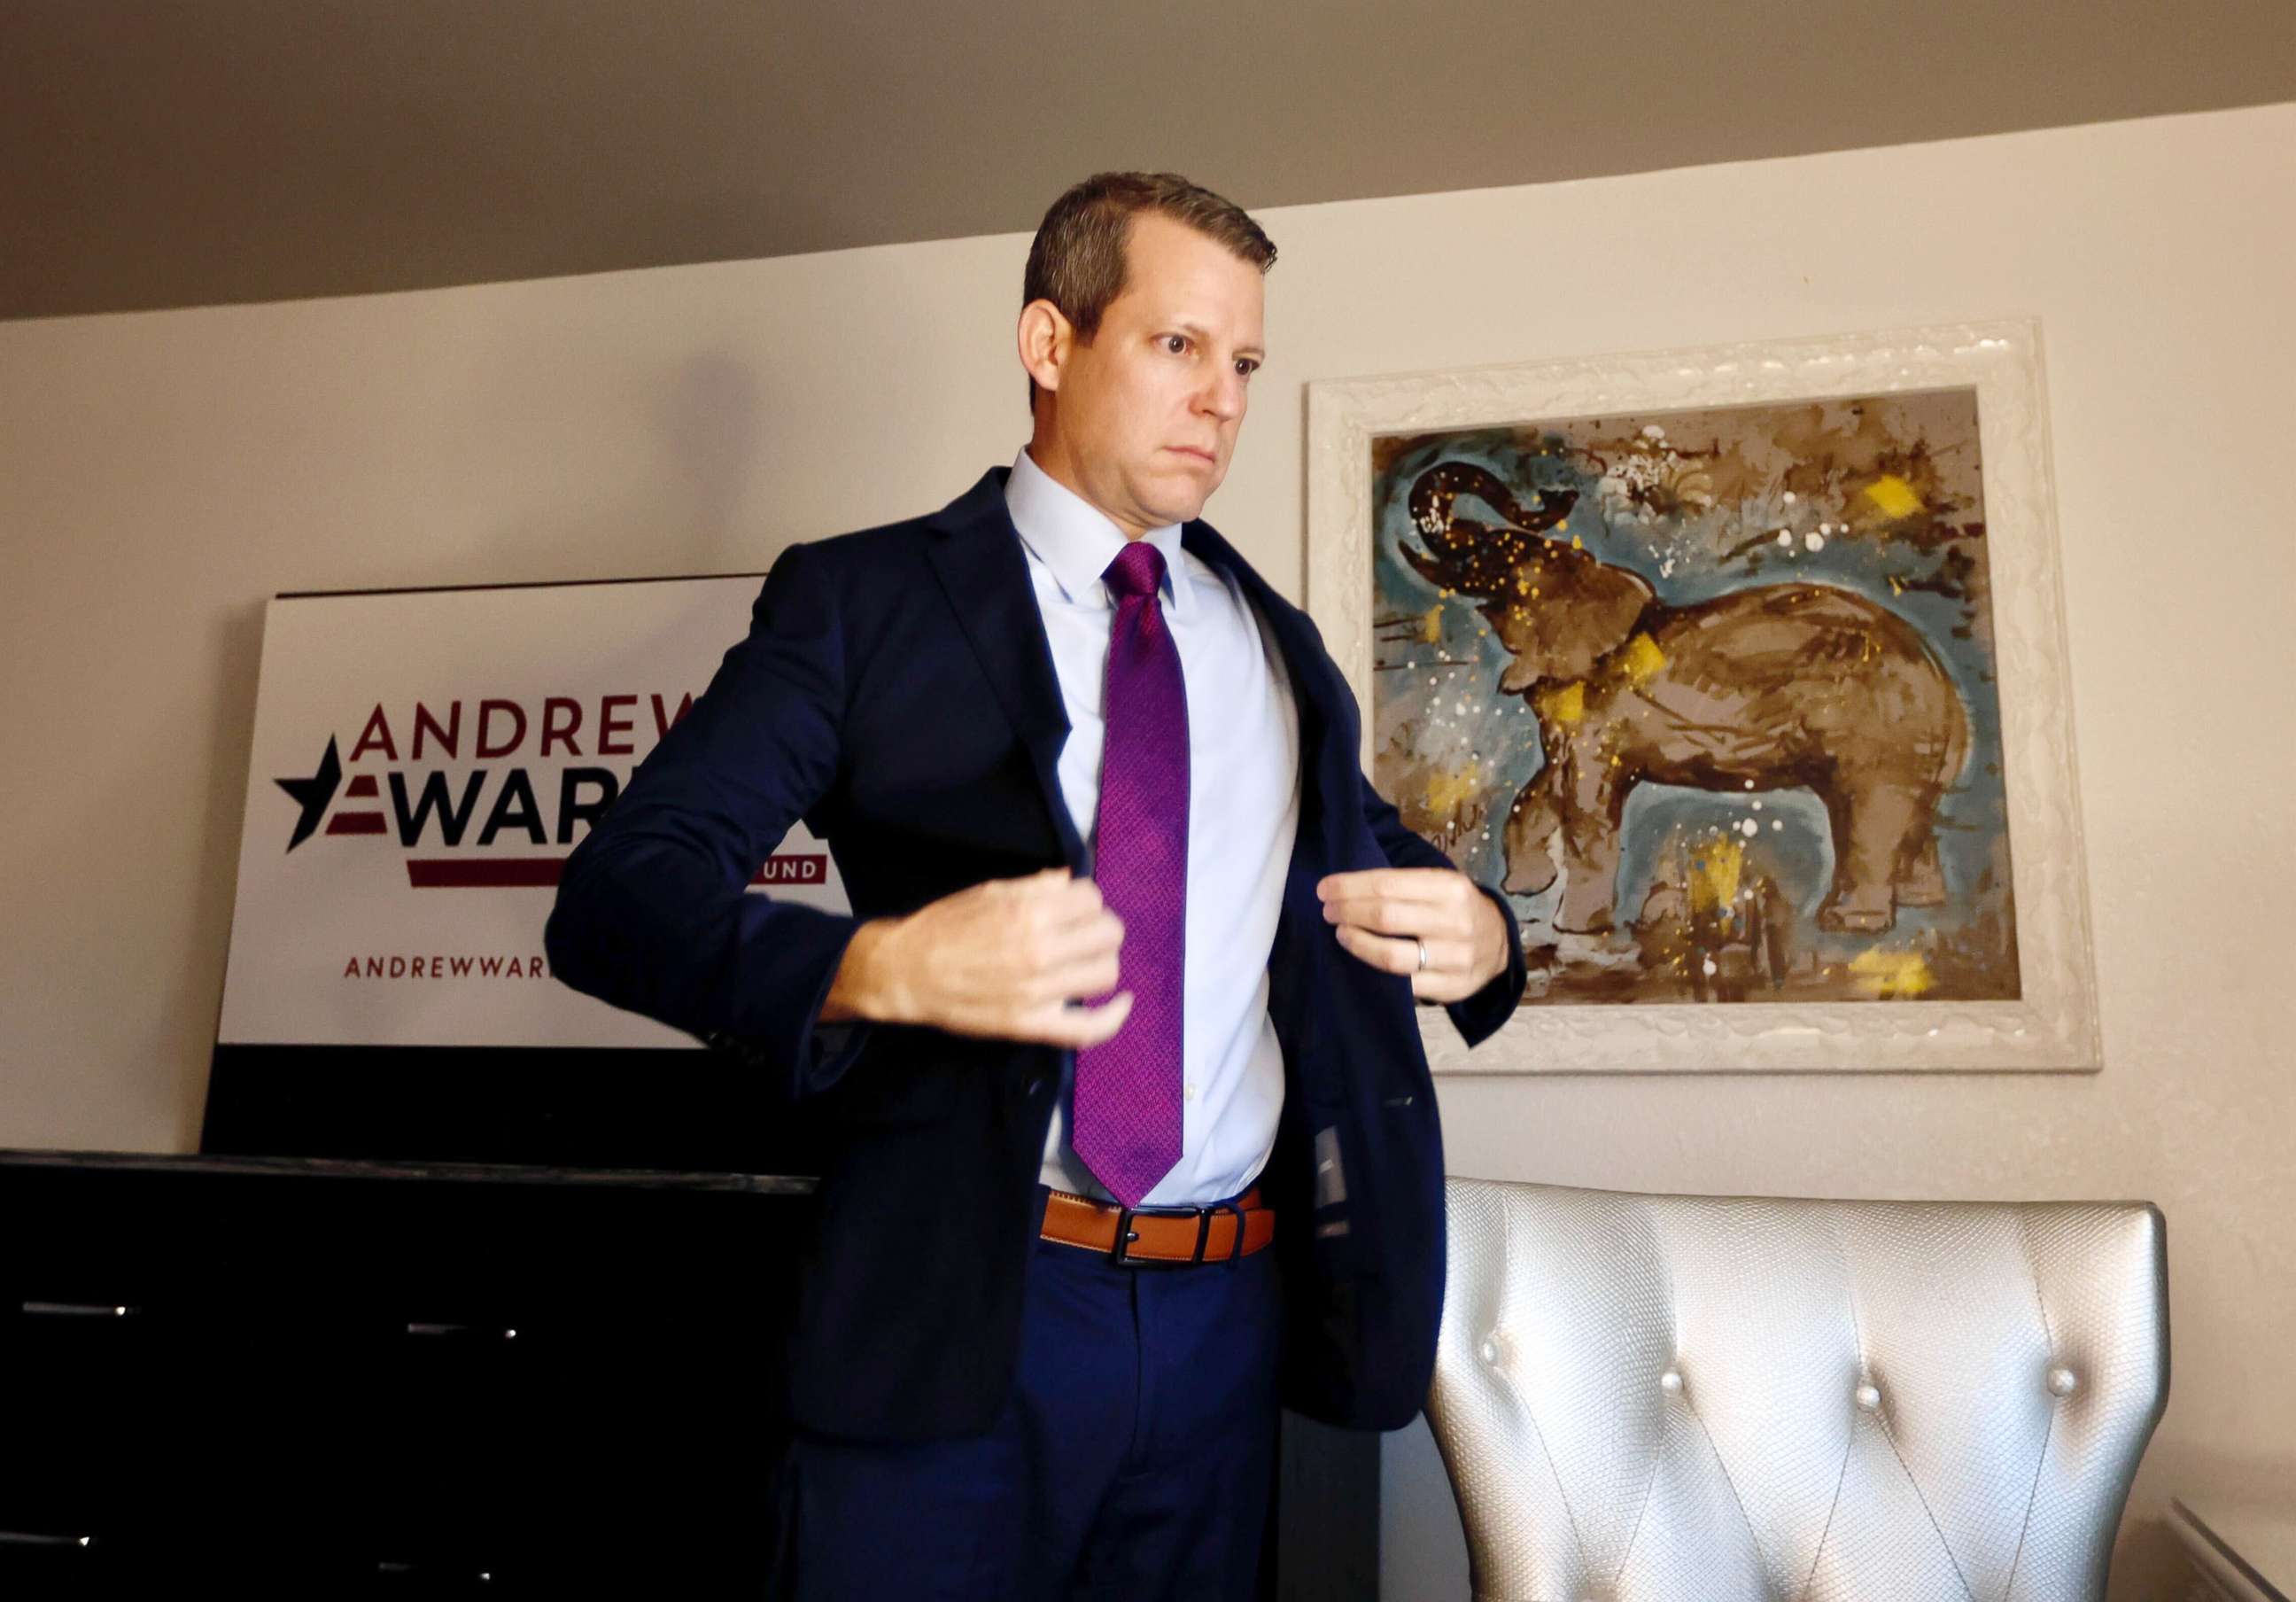 PHOTO: Andrew Warren, who was removed from his elected post as Hillsborough's state attorney by Gov. Ron DeSantis, prepares for a press conference in Tallahassee, Fla., Aug. 17, 2022.